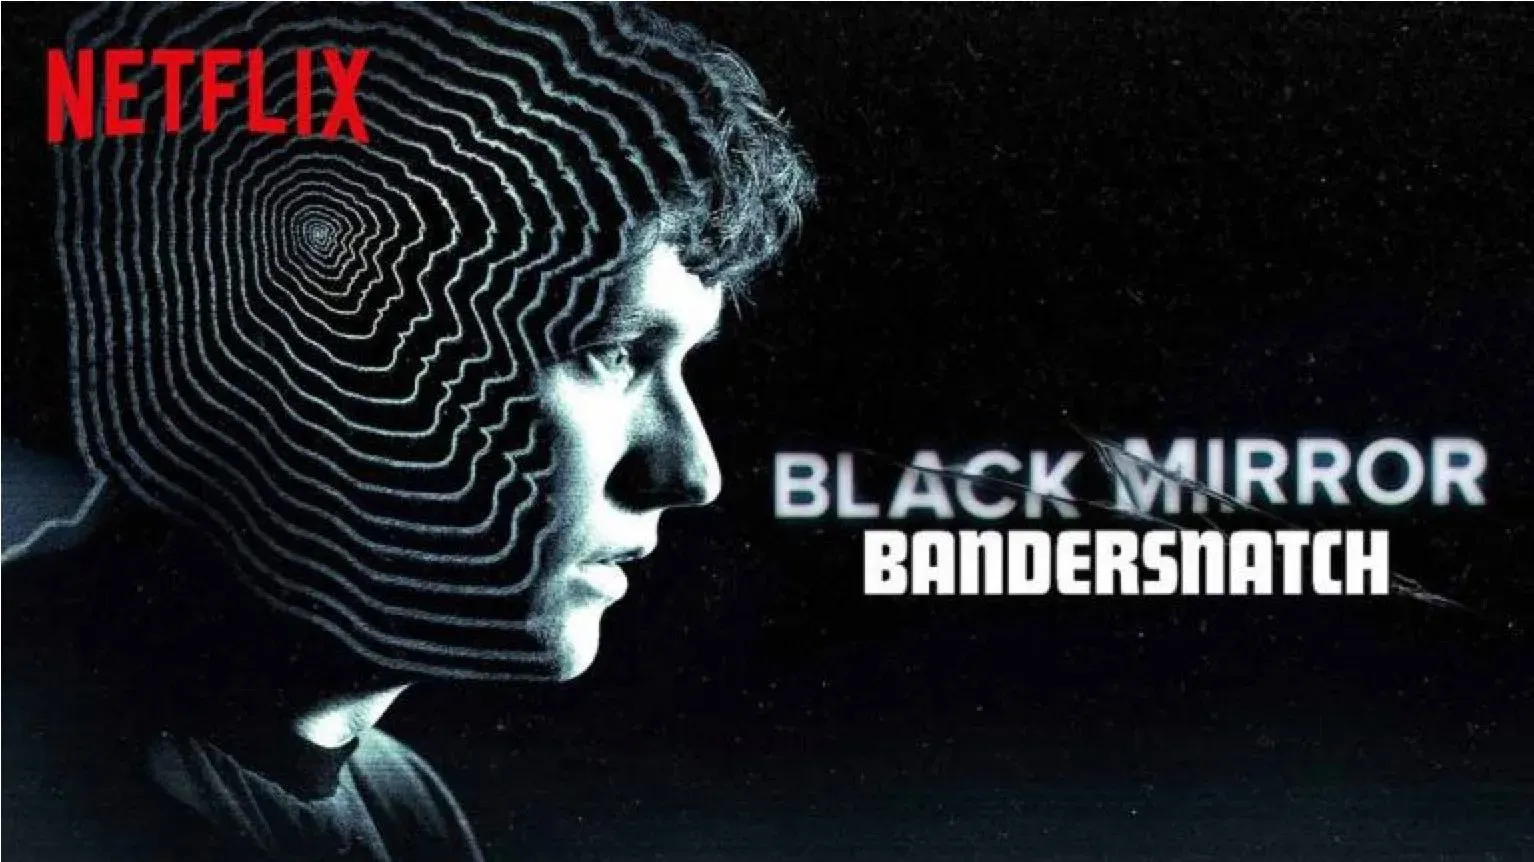 Some thoughts on Netflix's Bandersnatch and interactive cinema